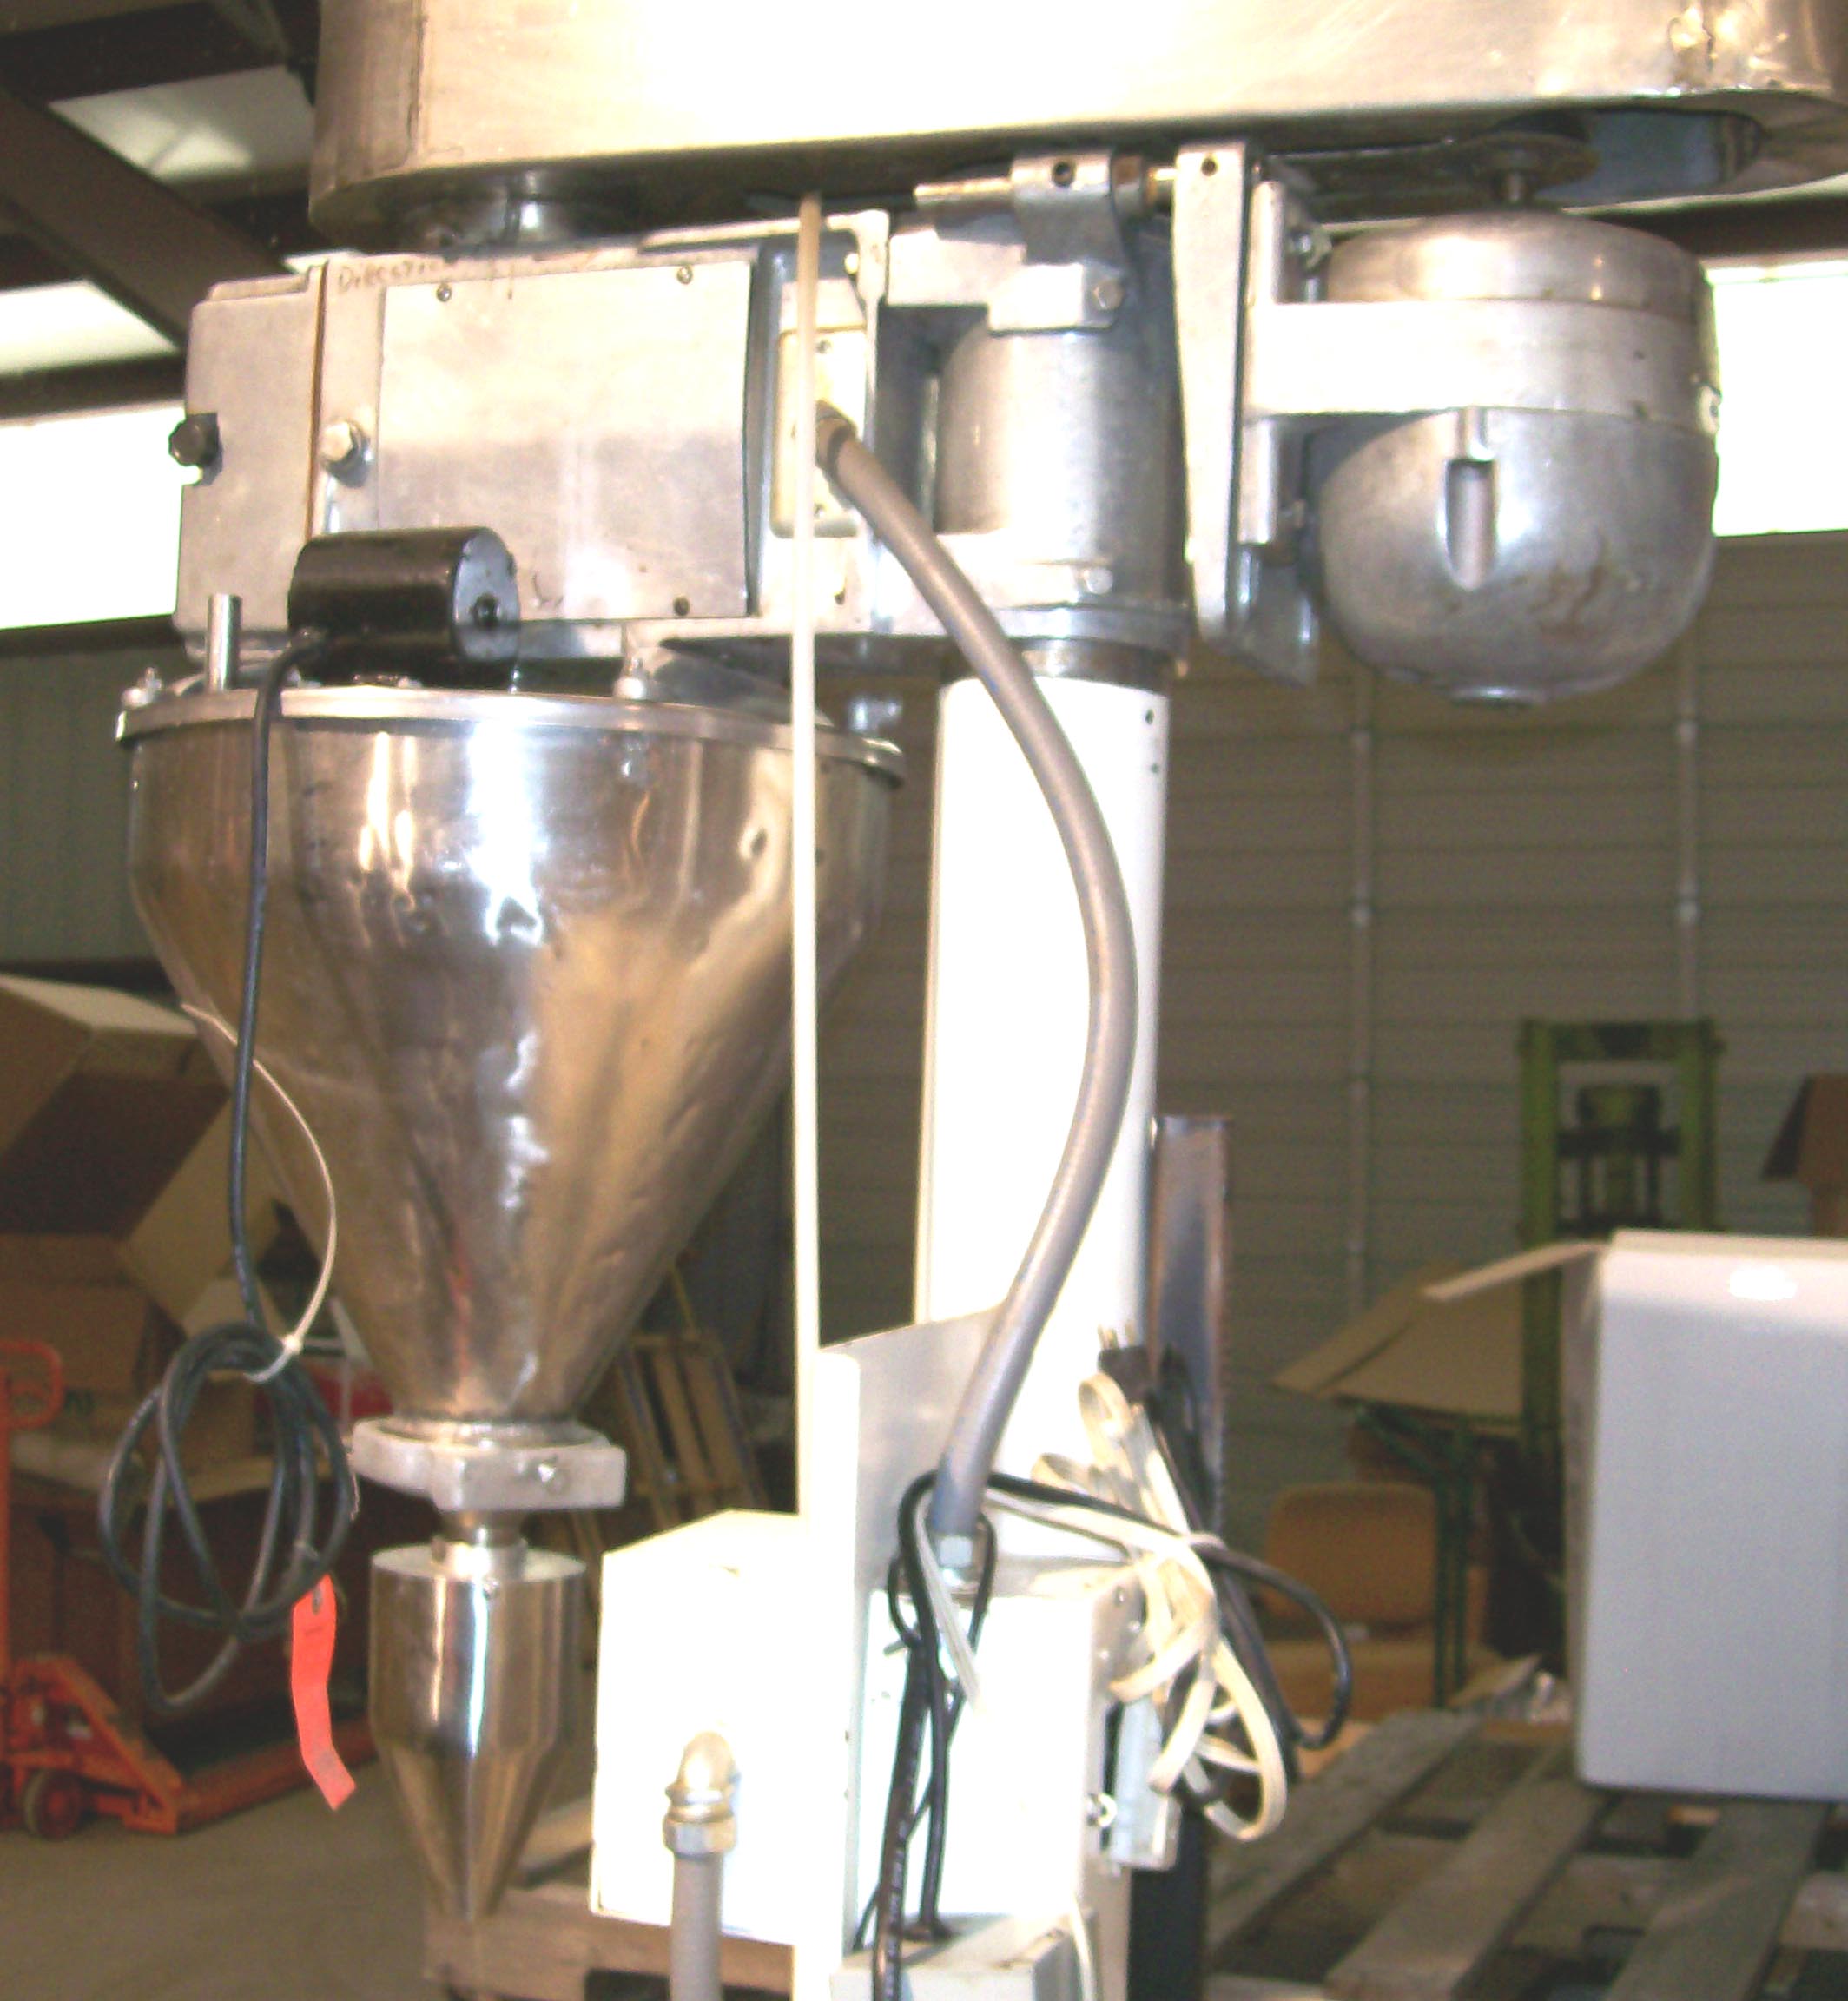 Mateer Model 31-A Auger Filler.  Stainless Steel.  Hopper is approx 5 gallon capacity.  Fitted with industrial vibrator to aid with filling.  0.5 HP, 900 RPM, 220 V.  Filler comes with manual, various gaskets and seals, 1 auger, foot pedal actuator and 2 relays for electronics.  Additional augers can be purchased directly from Mateer-Burt for different flow rates and levels of accuracy.